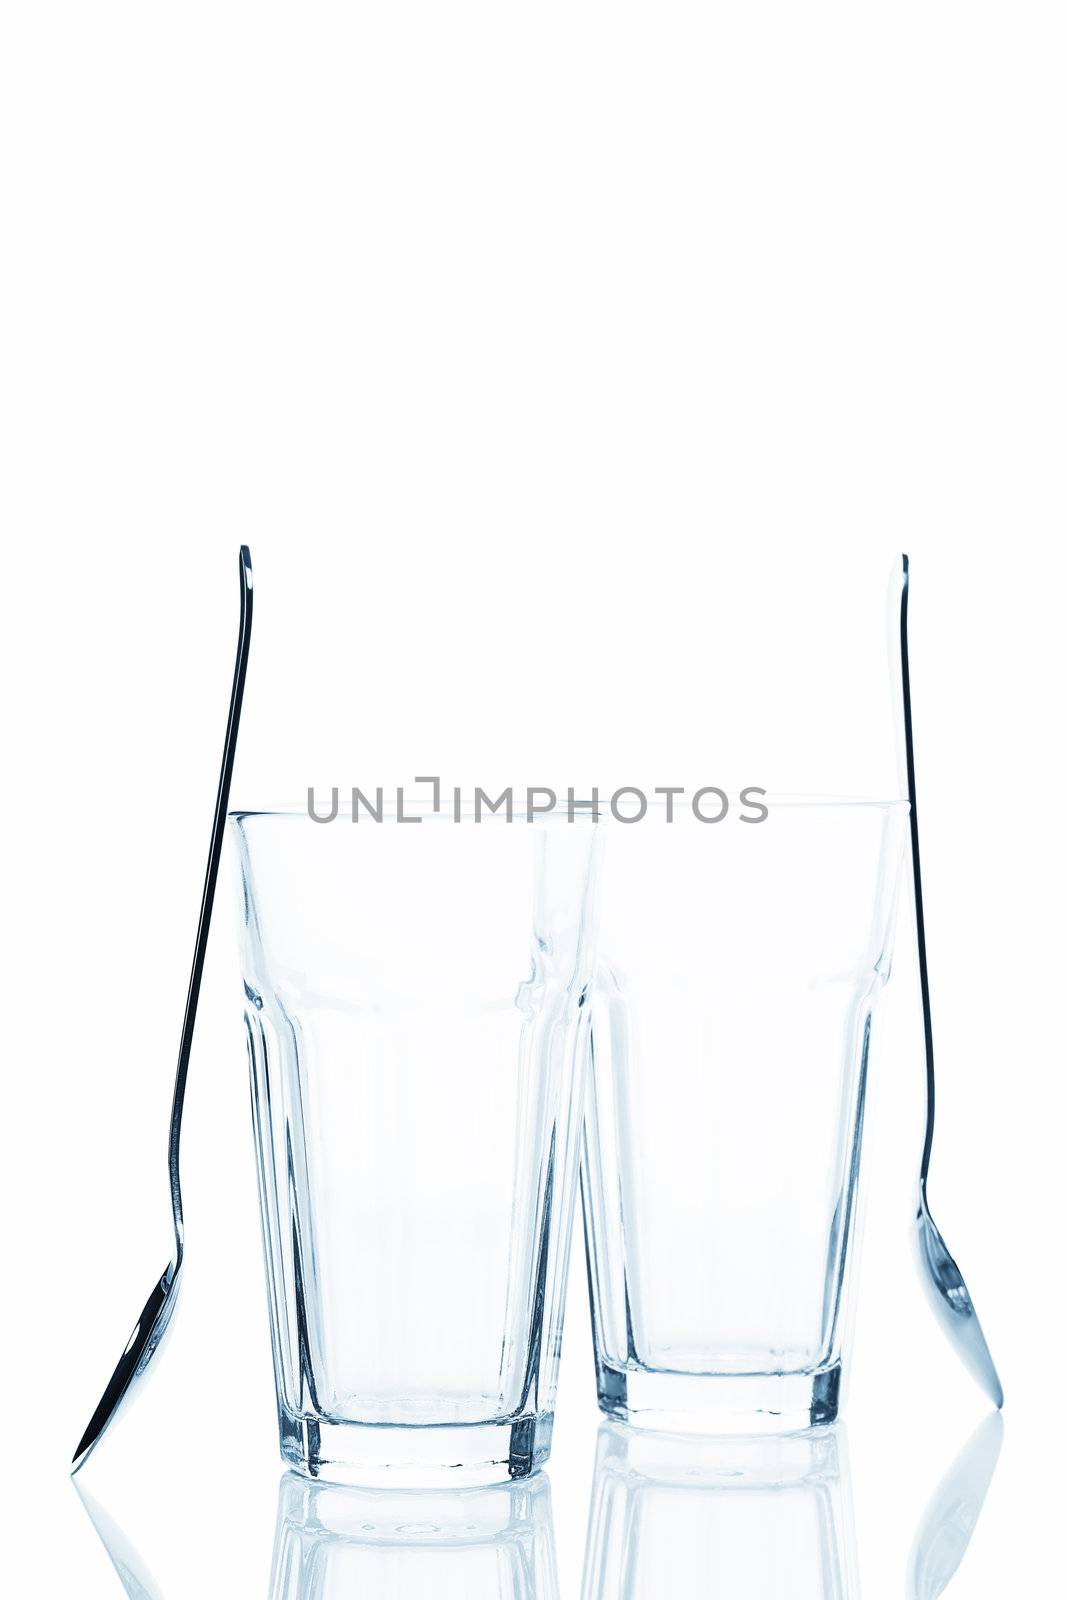 two empty latte macchiato glasses with standing spoons on white background